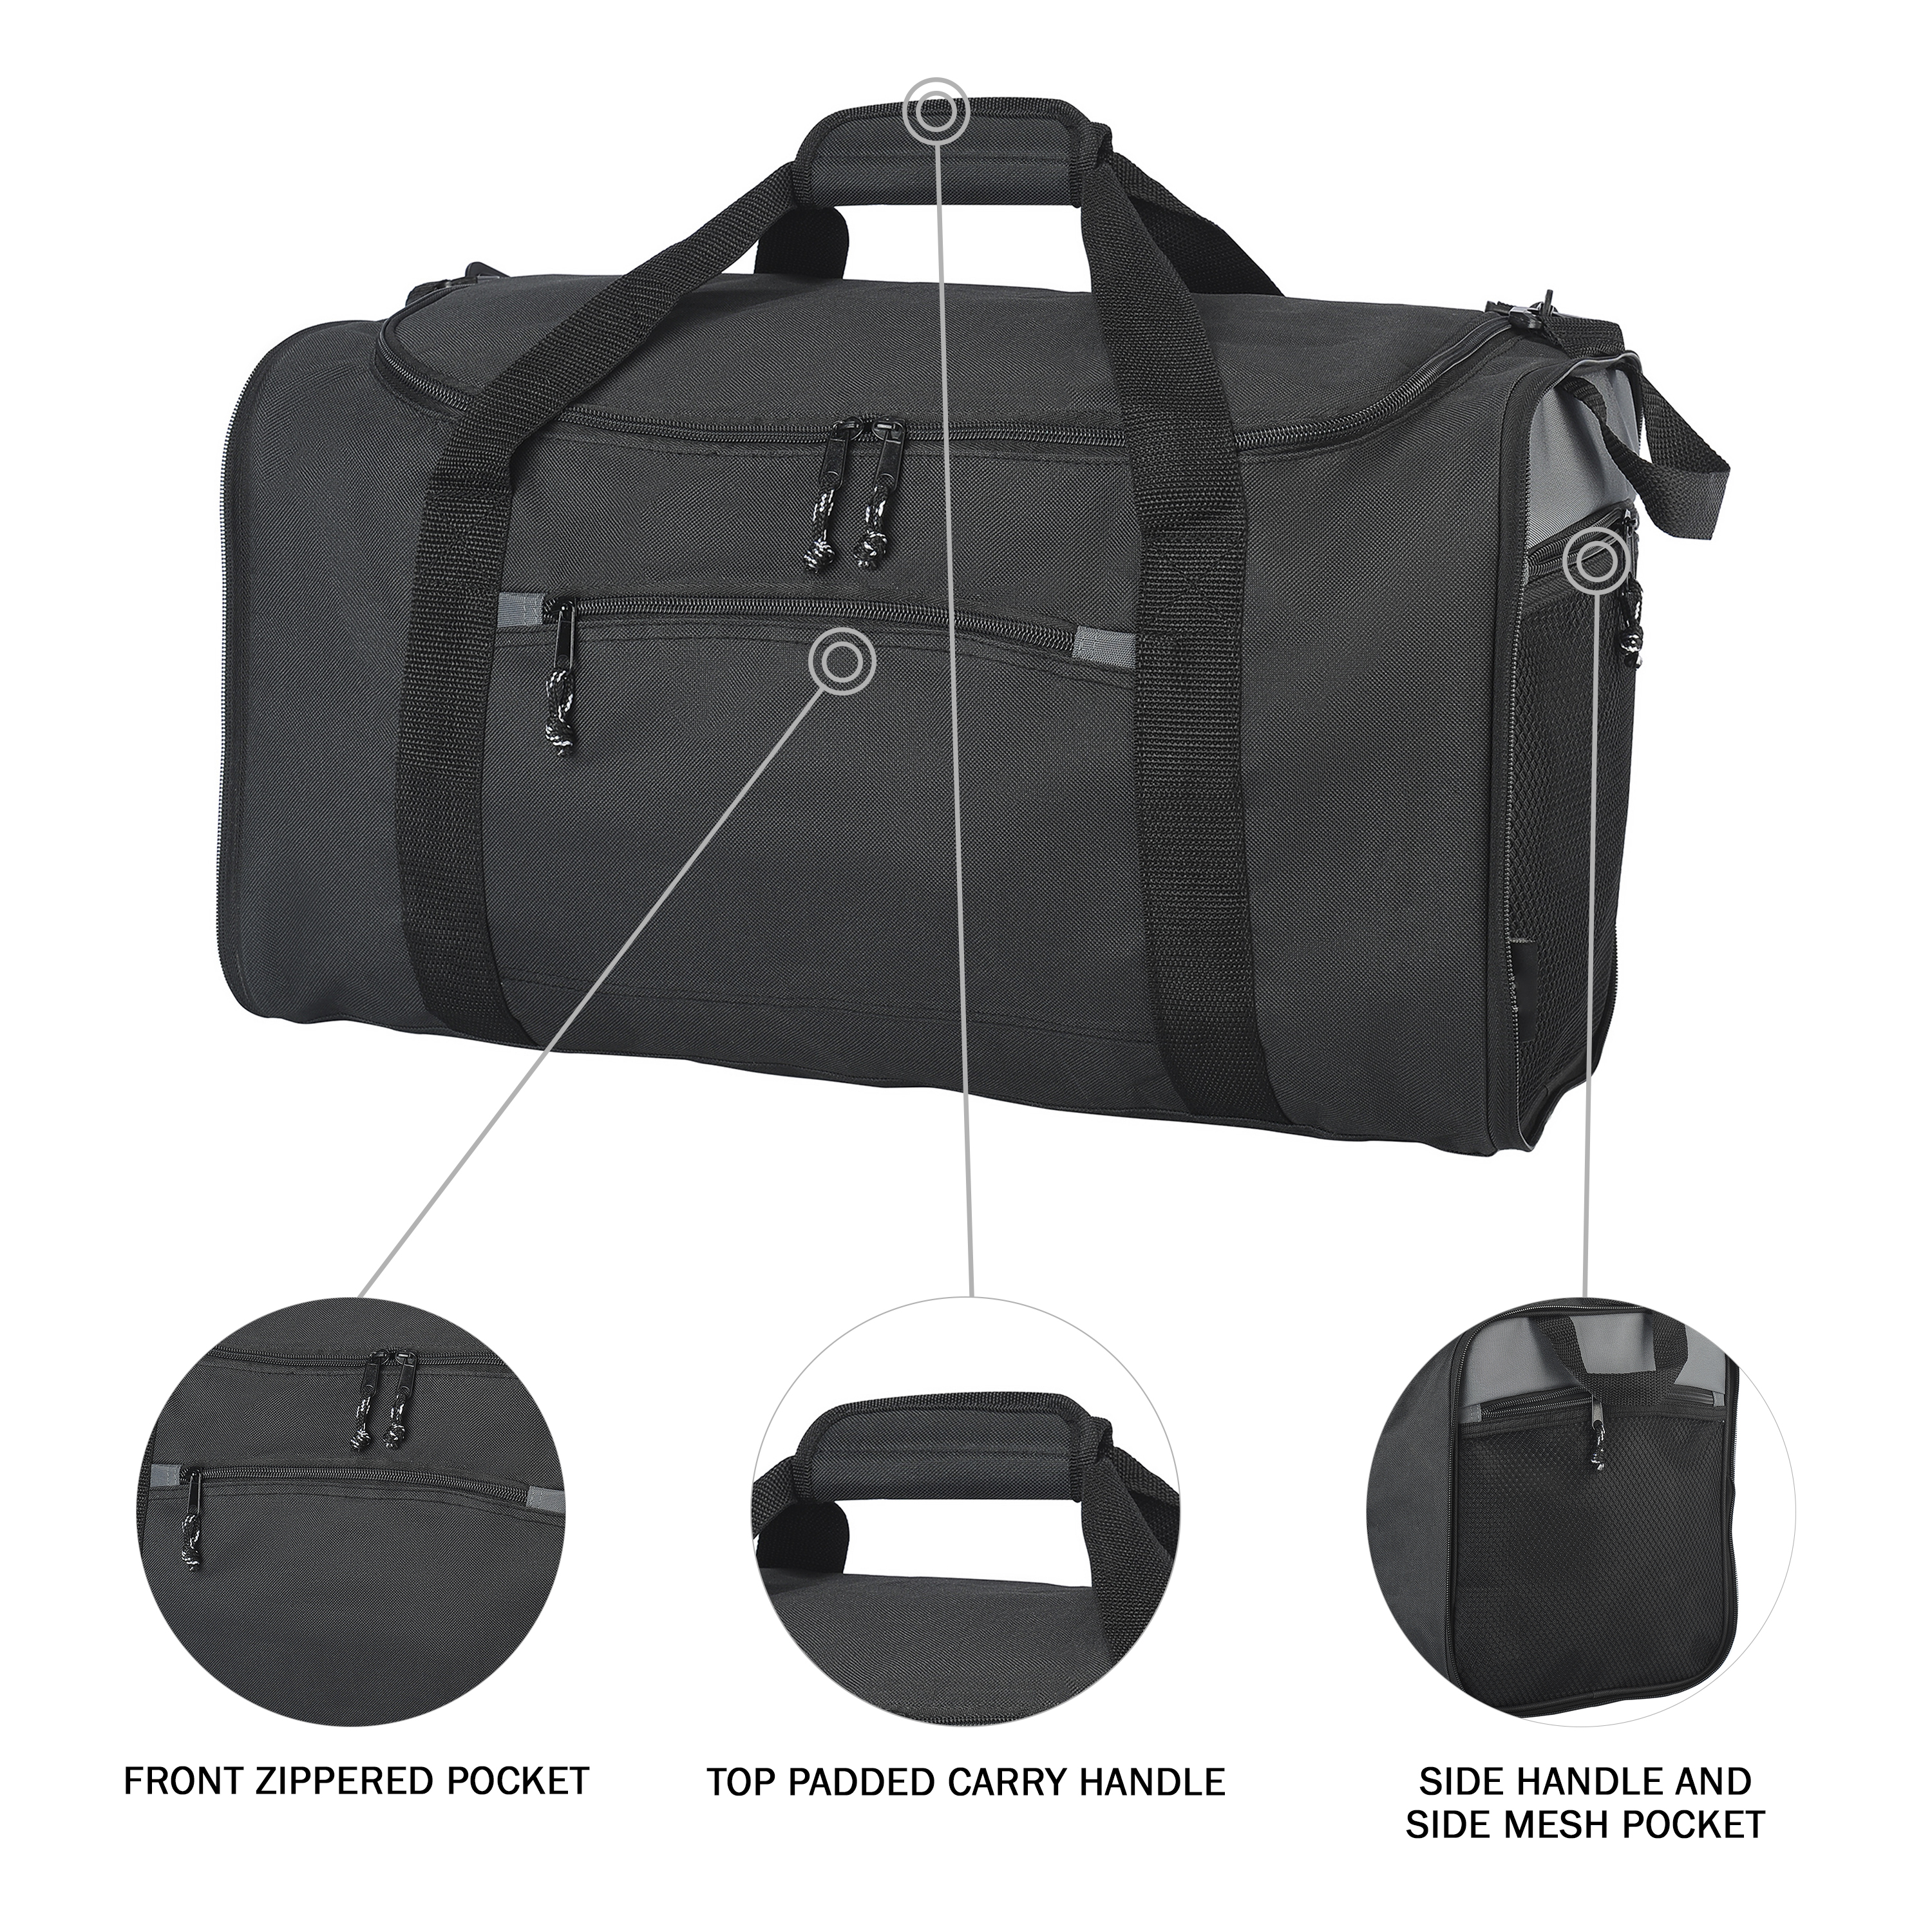 Protégé 20" Collapsible Sport and Travel Duffel Bag, Black - image 2 of 11